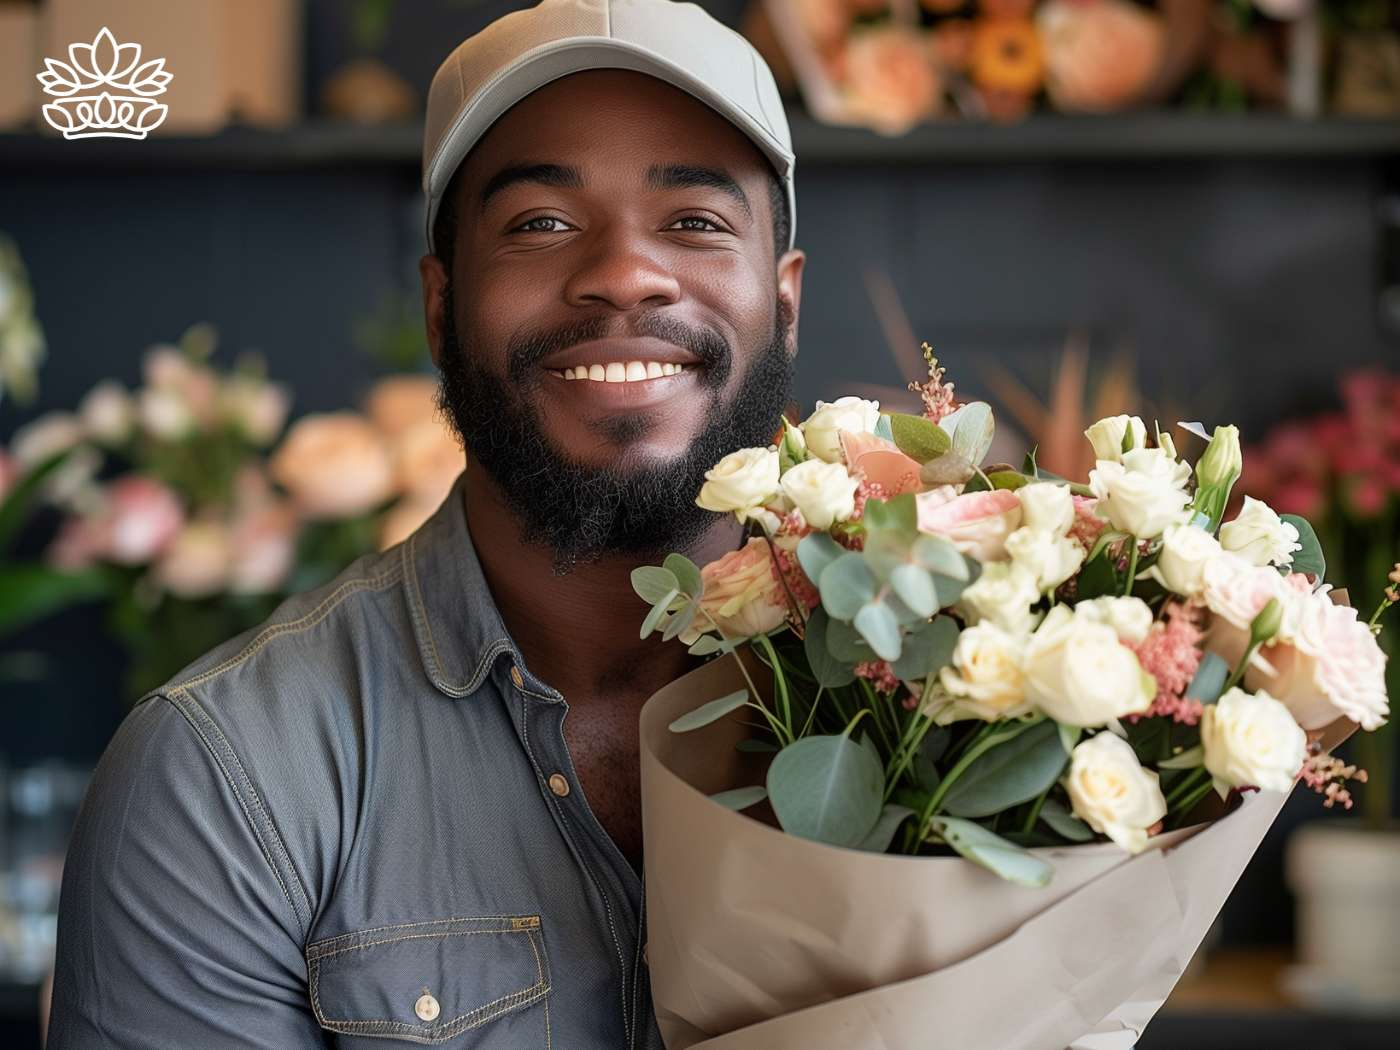 Cheerful florist in a cap holding a delicate bouquet of assorted large pastel flowers, showcasing the personal touch of Fabulous Flowers and Gifts.